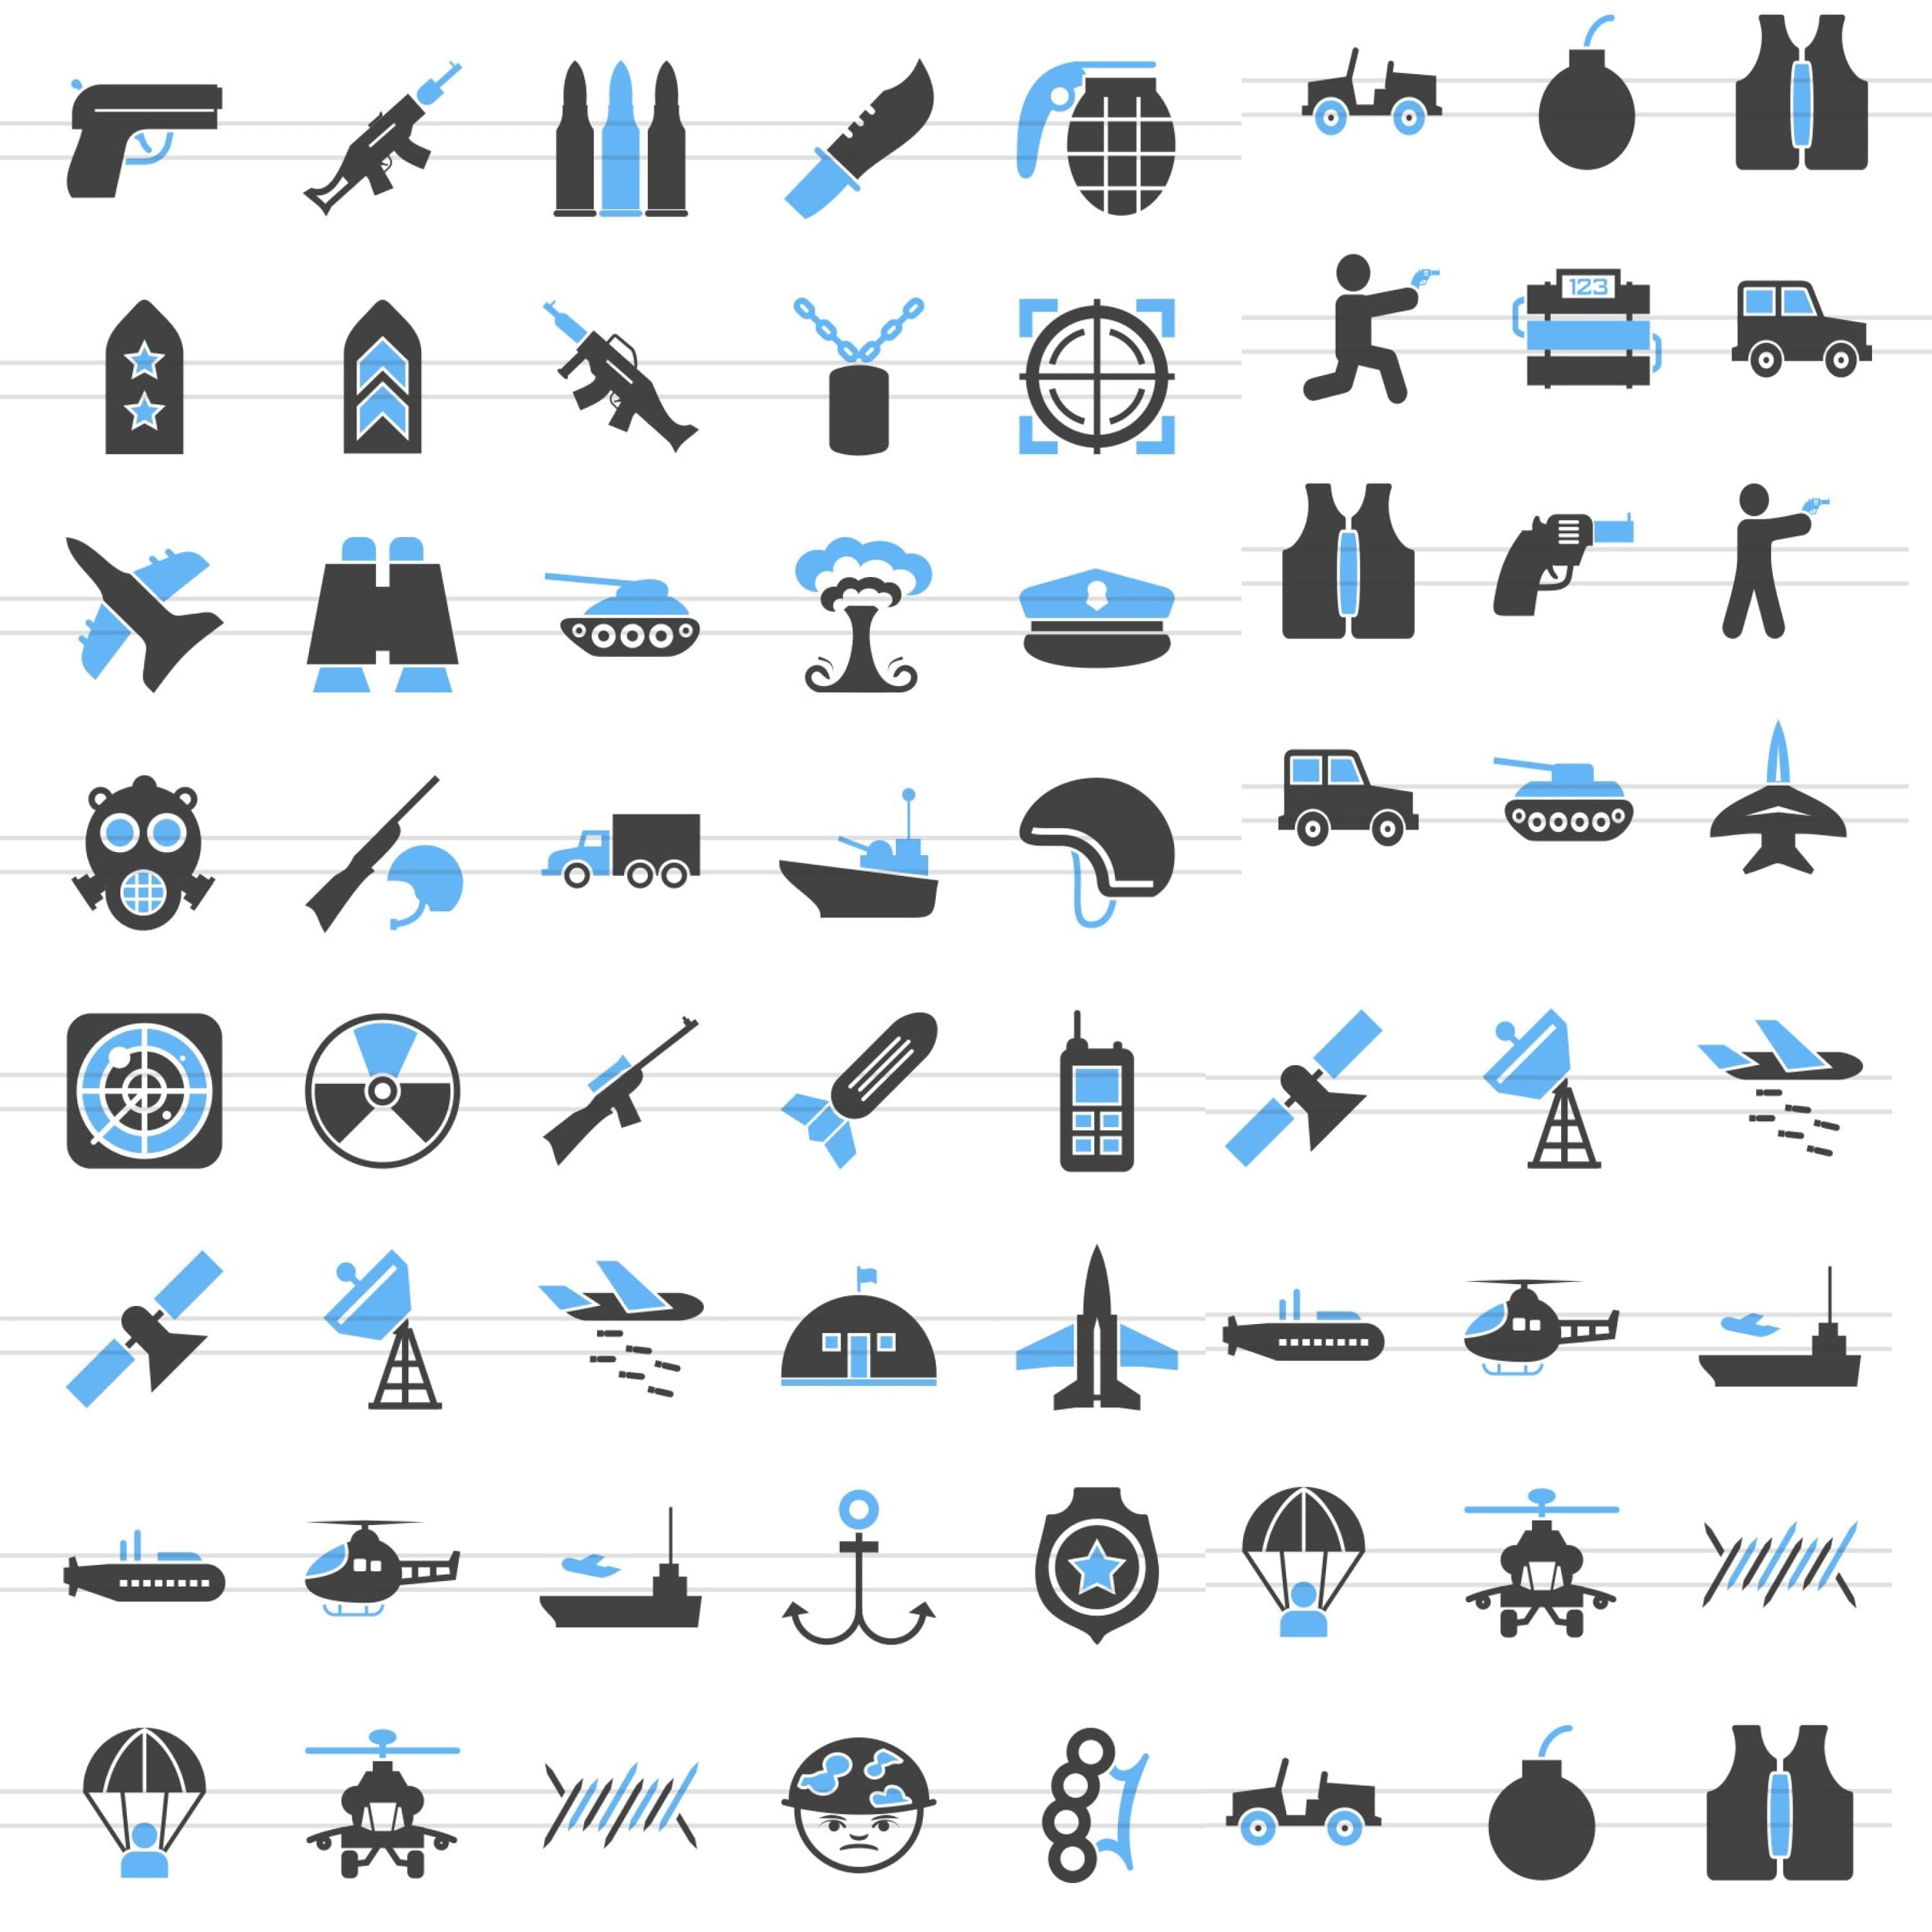 Icons with weapons are drawn in blue and black.